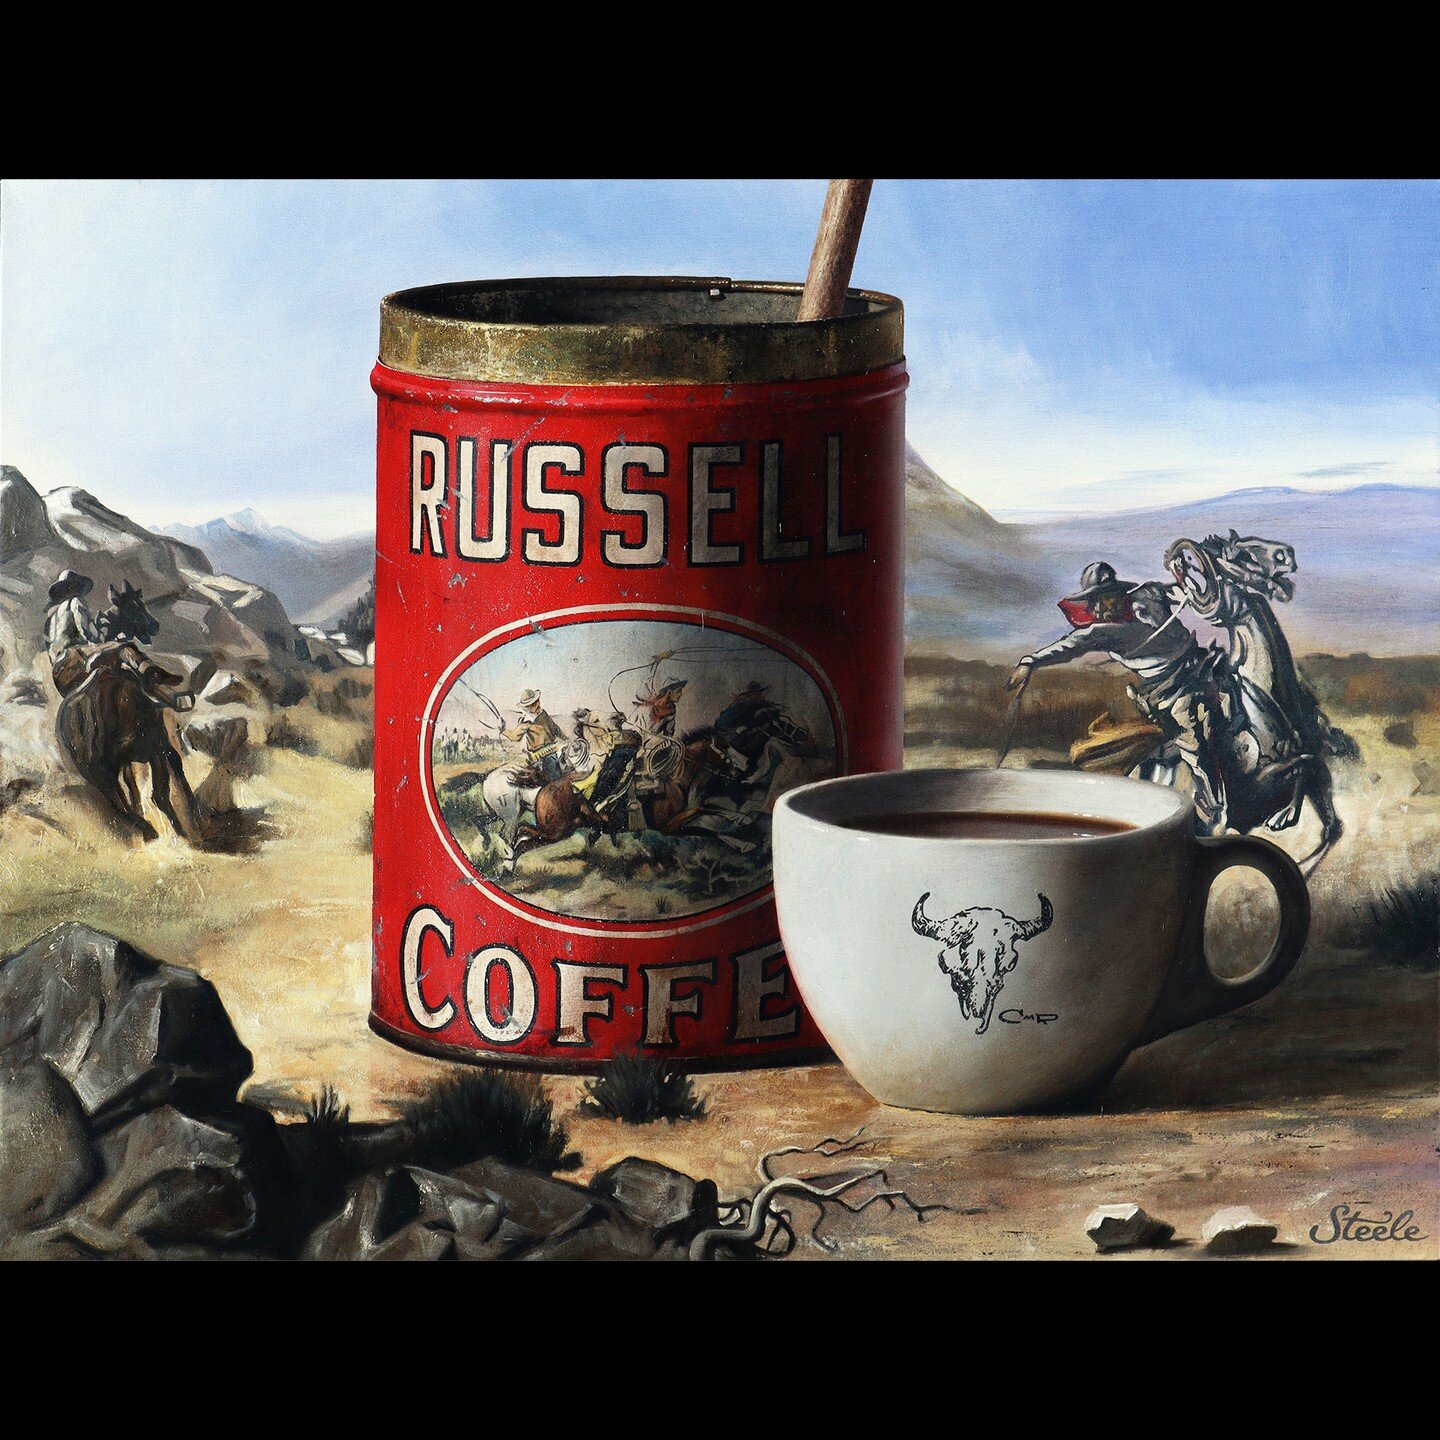 Thrilled to be part of the Coors Western Art Exhibit, coming up in January! Got to a sample a variety of my favorite western artists.

@coorswesternart @younggunscolorado #remington #fredericremington #cmrussell #cowboy #cowboyart #coffee #denver #ar